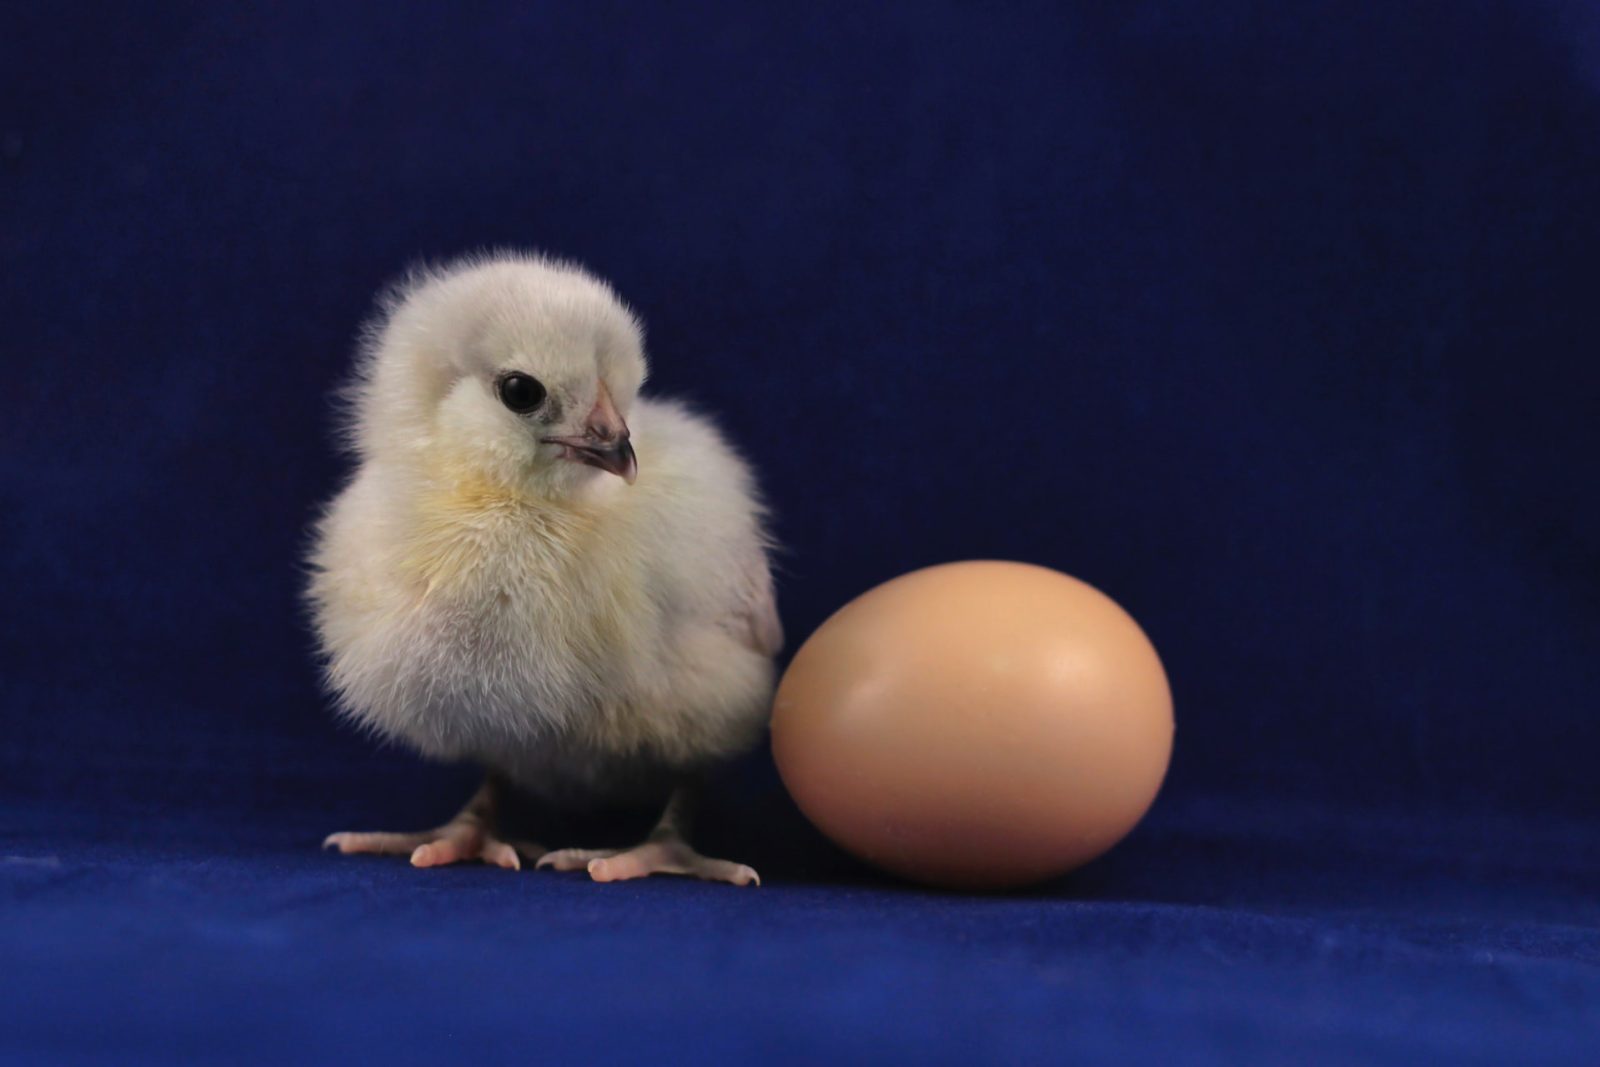 What do chicken farms do with male chicks